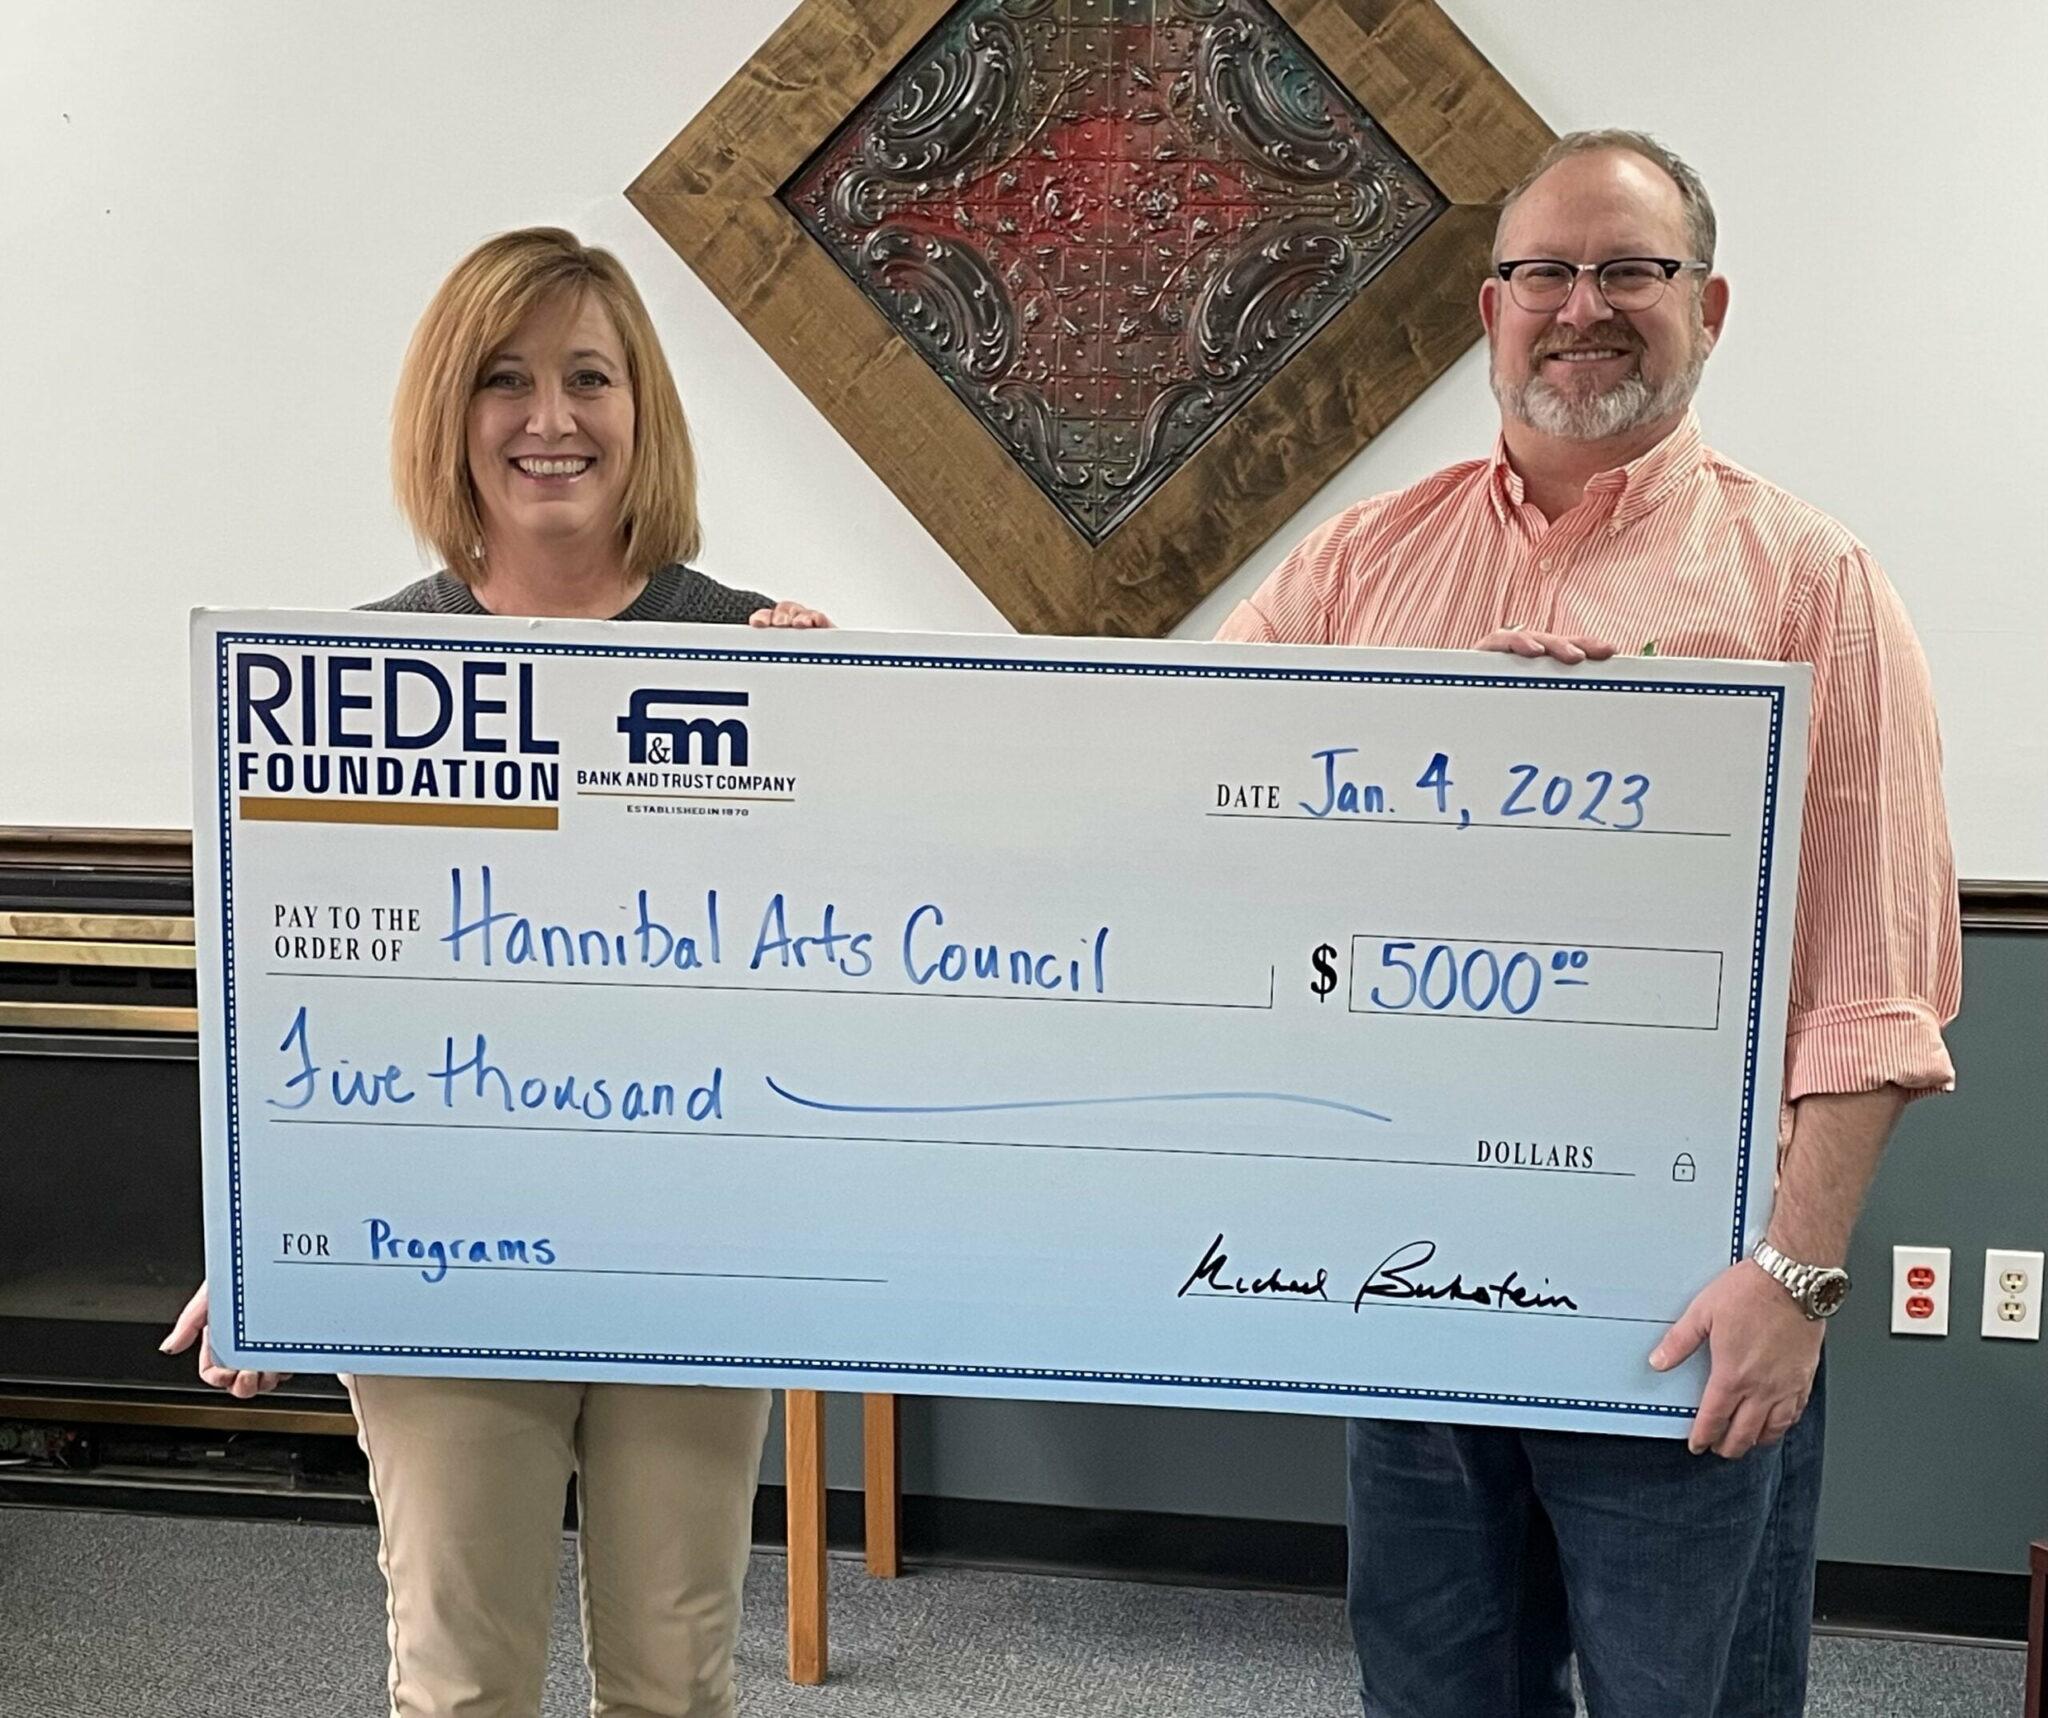 Riedel Foundation Administrator Sarah Deien presents a $5,000 check for youth programs to Hannibal Arts Council Executive Director Michael Gaines.